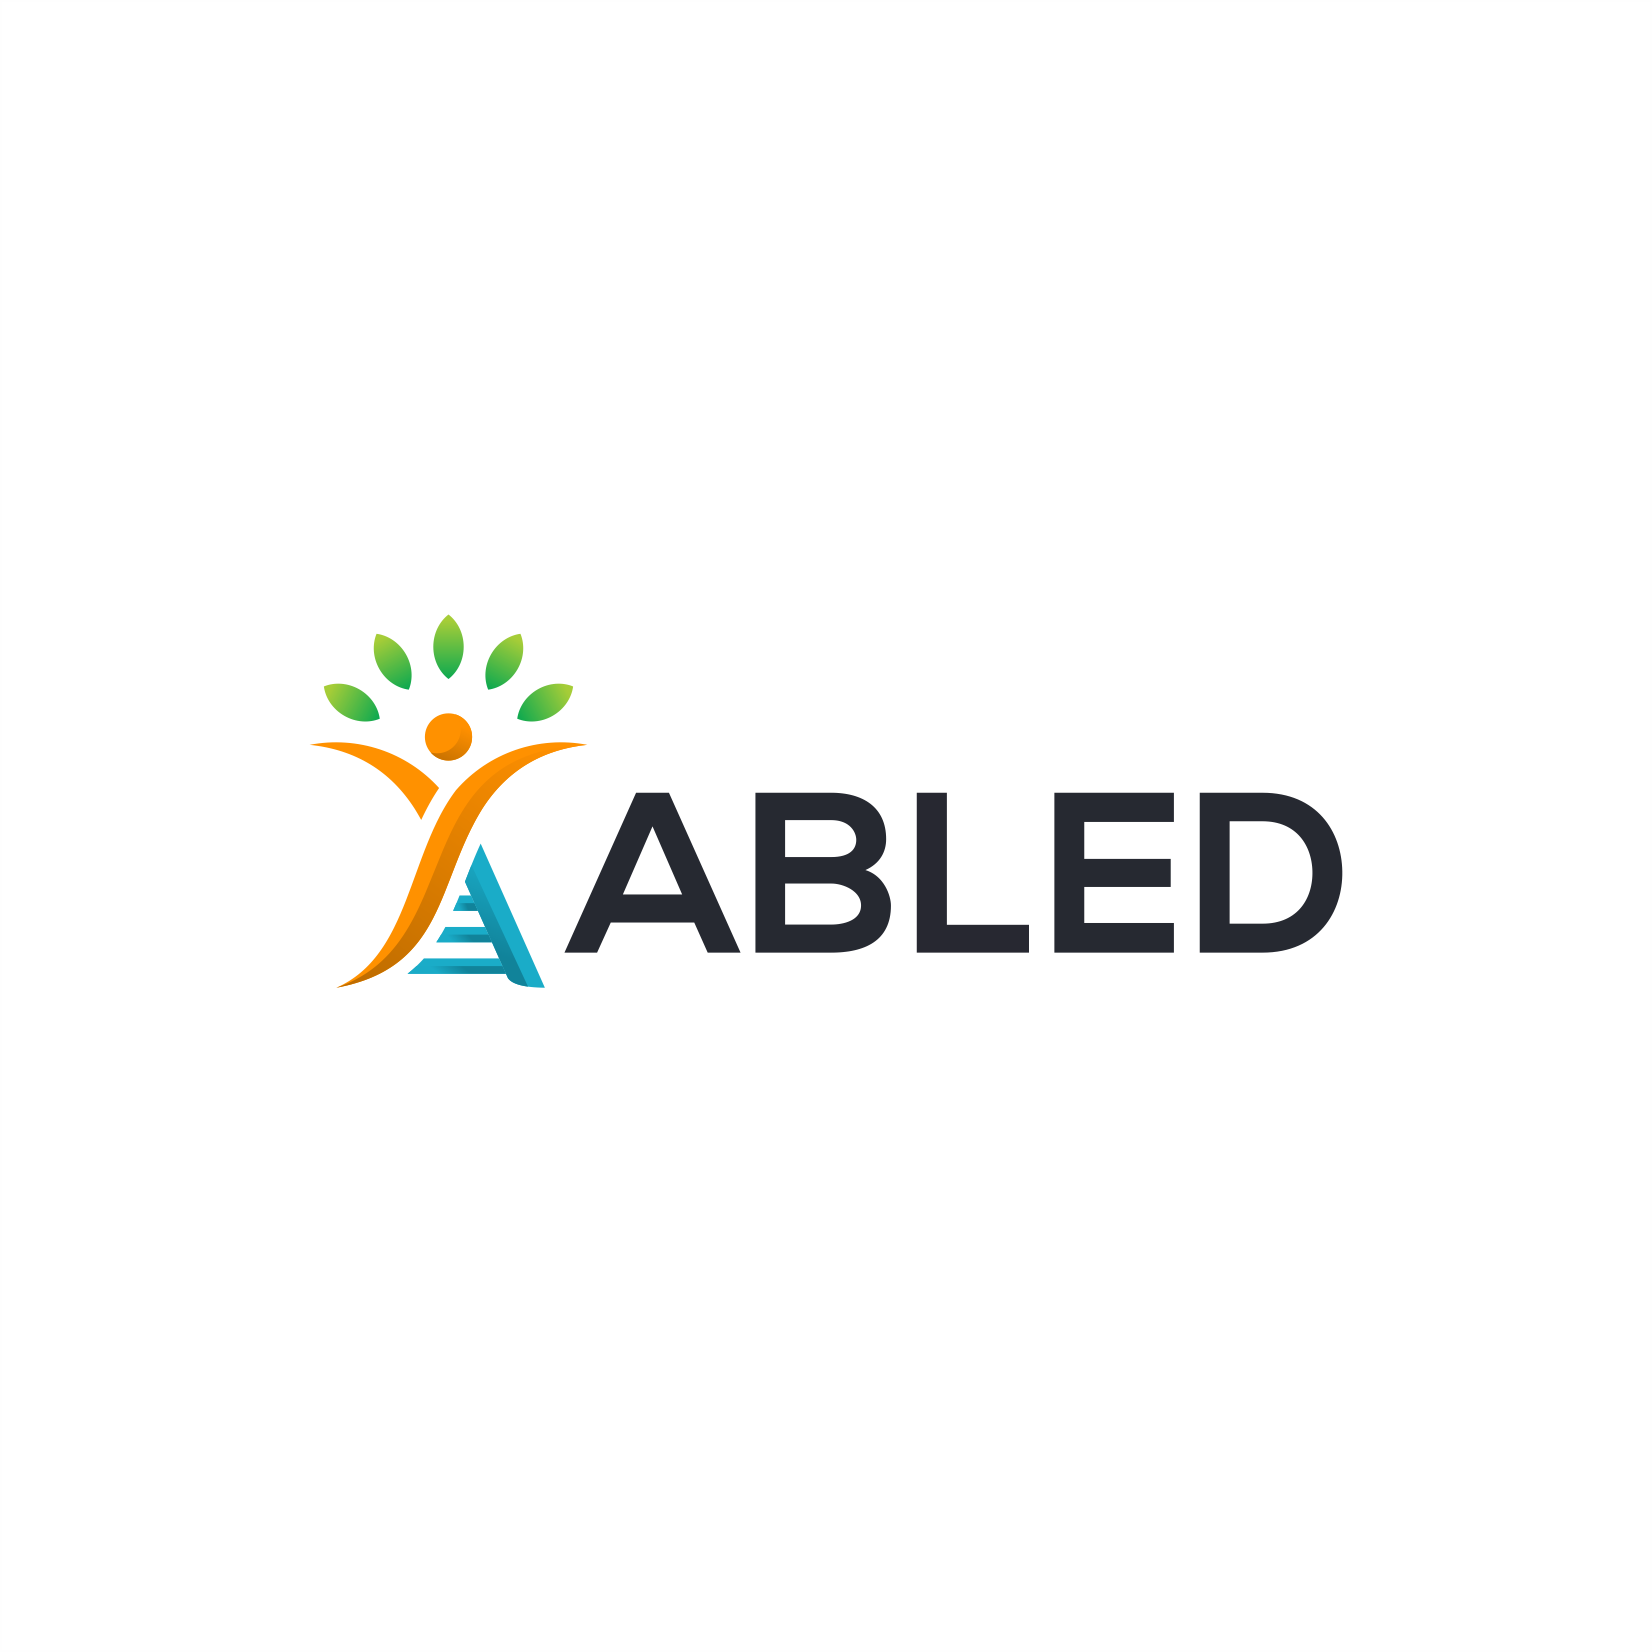 ABLED